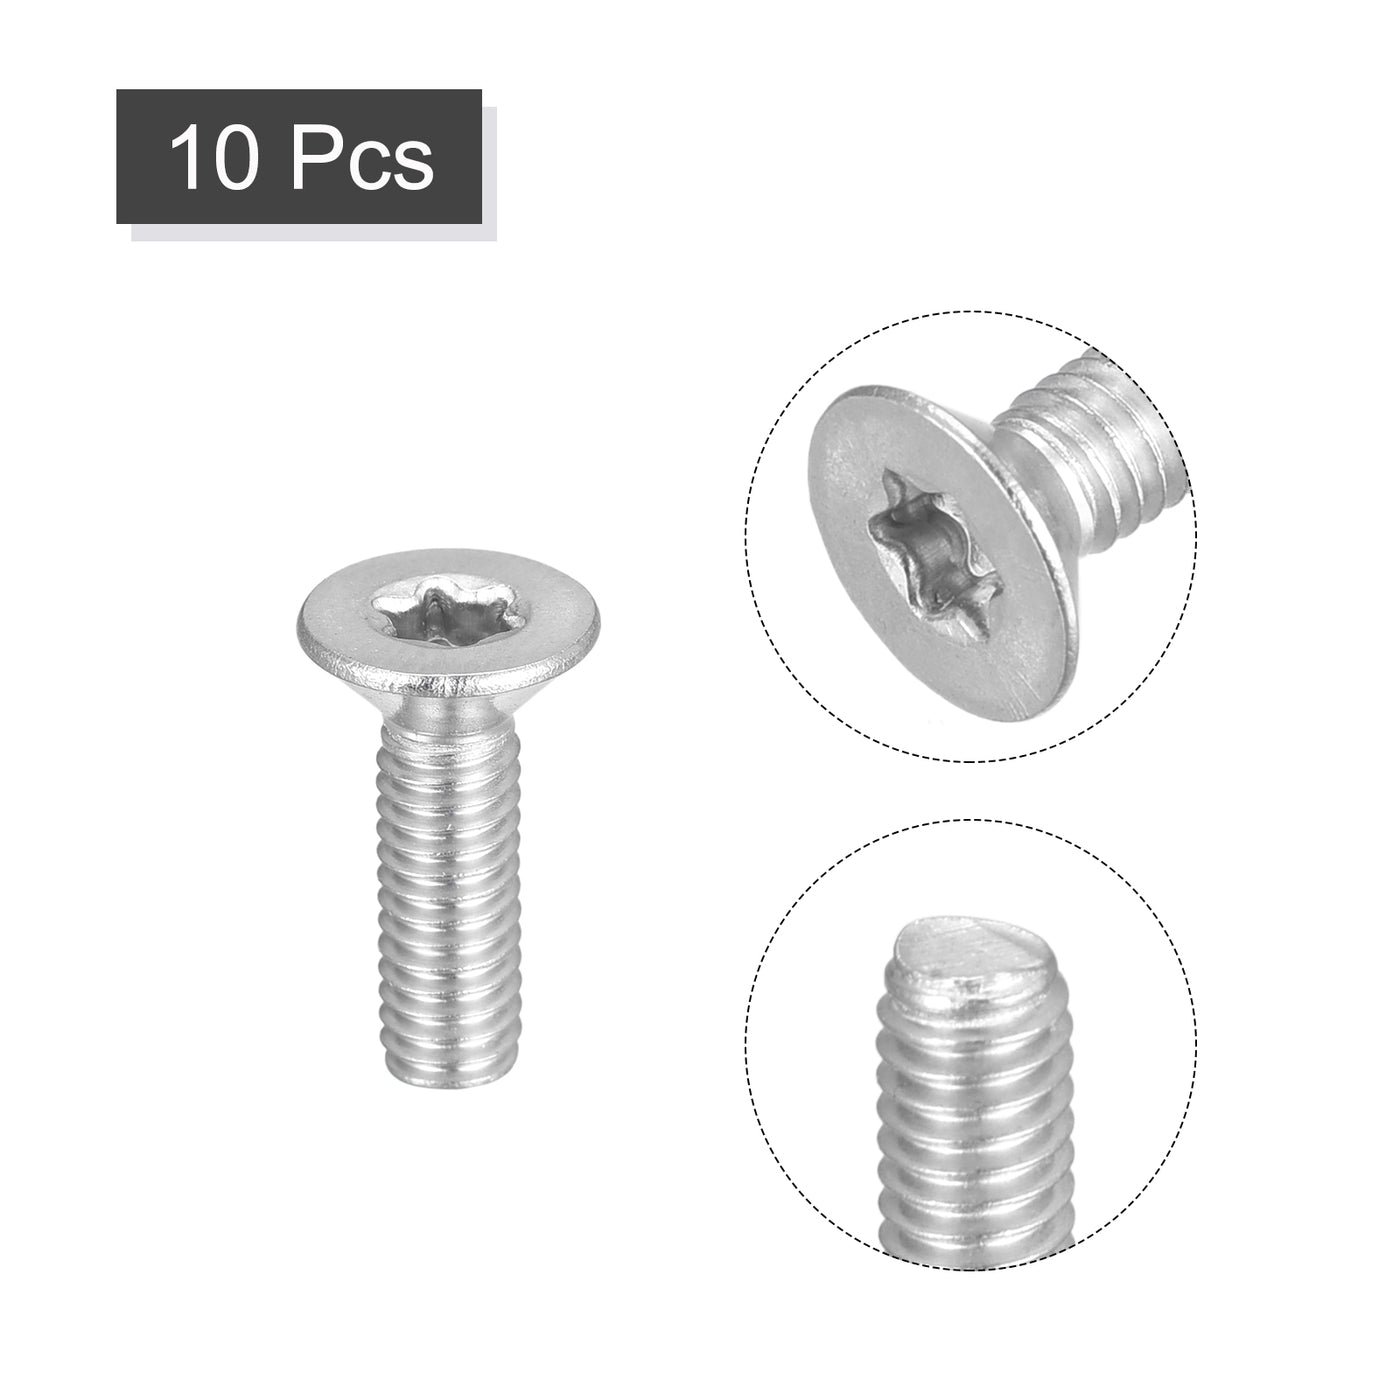 uxcell Uxcell M4x14mm Torx Security Screws, 10pcs 316 Stainless Steel Countersunk Head Screw